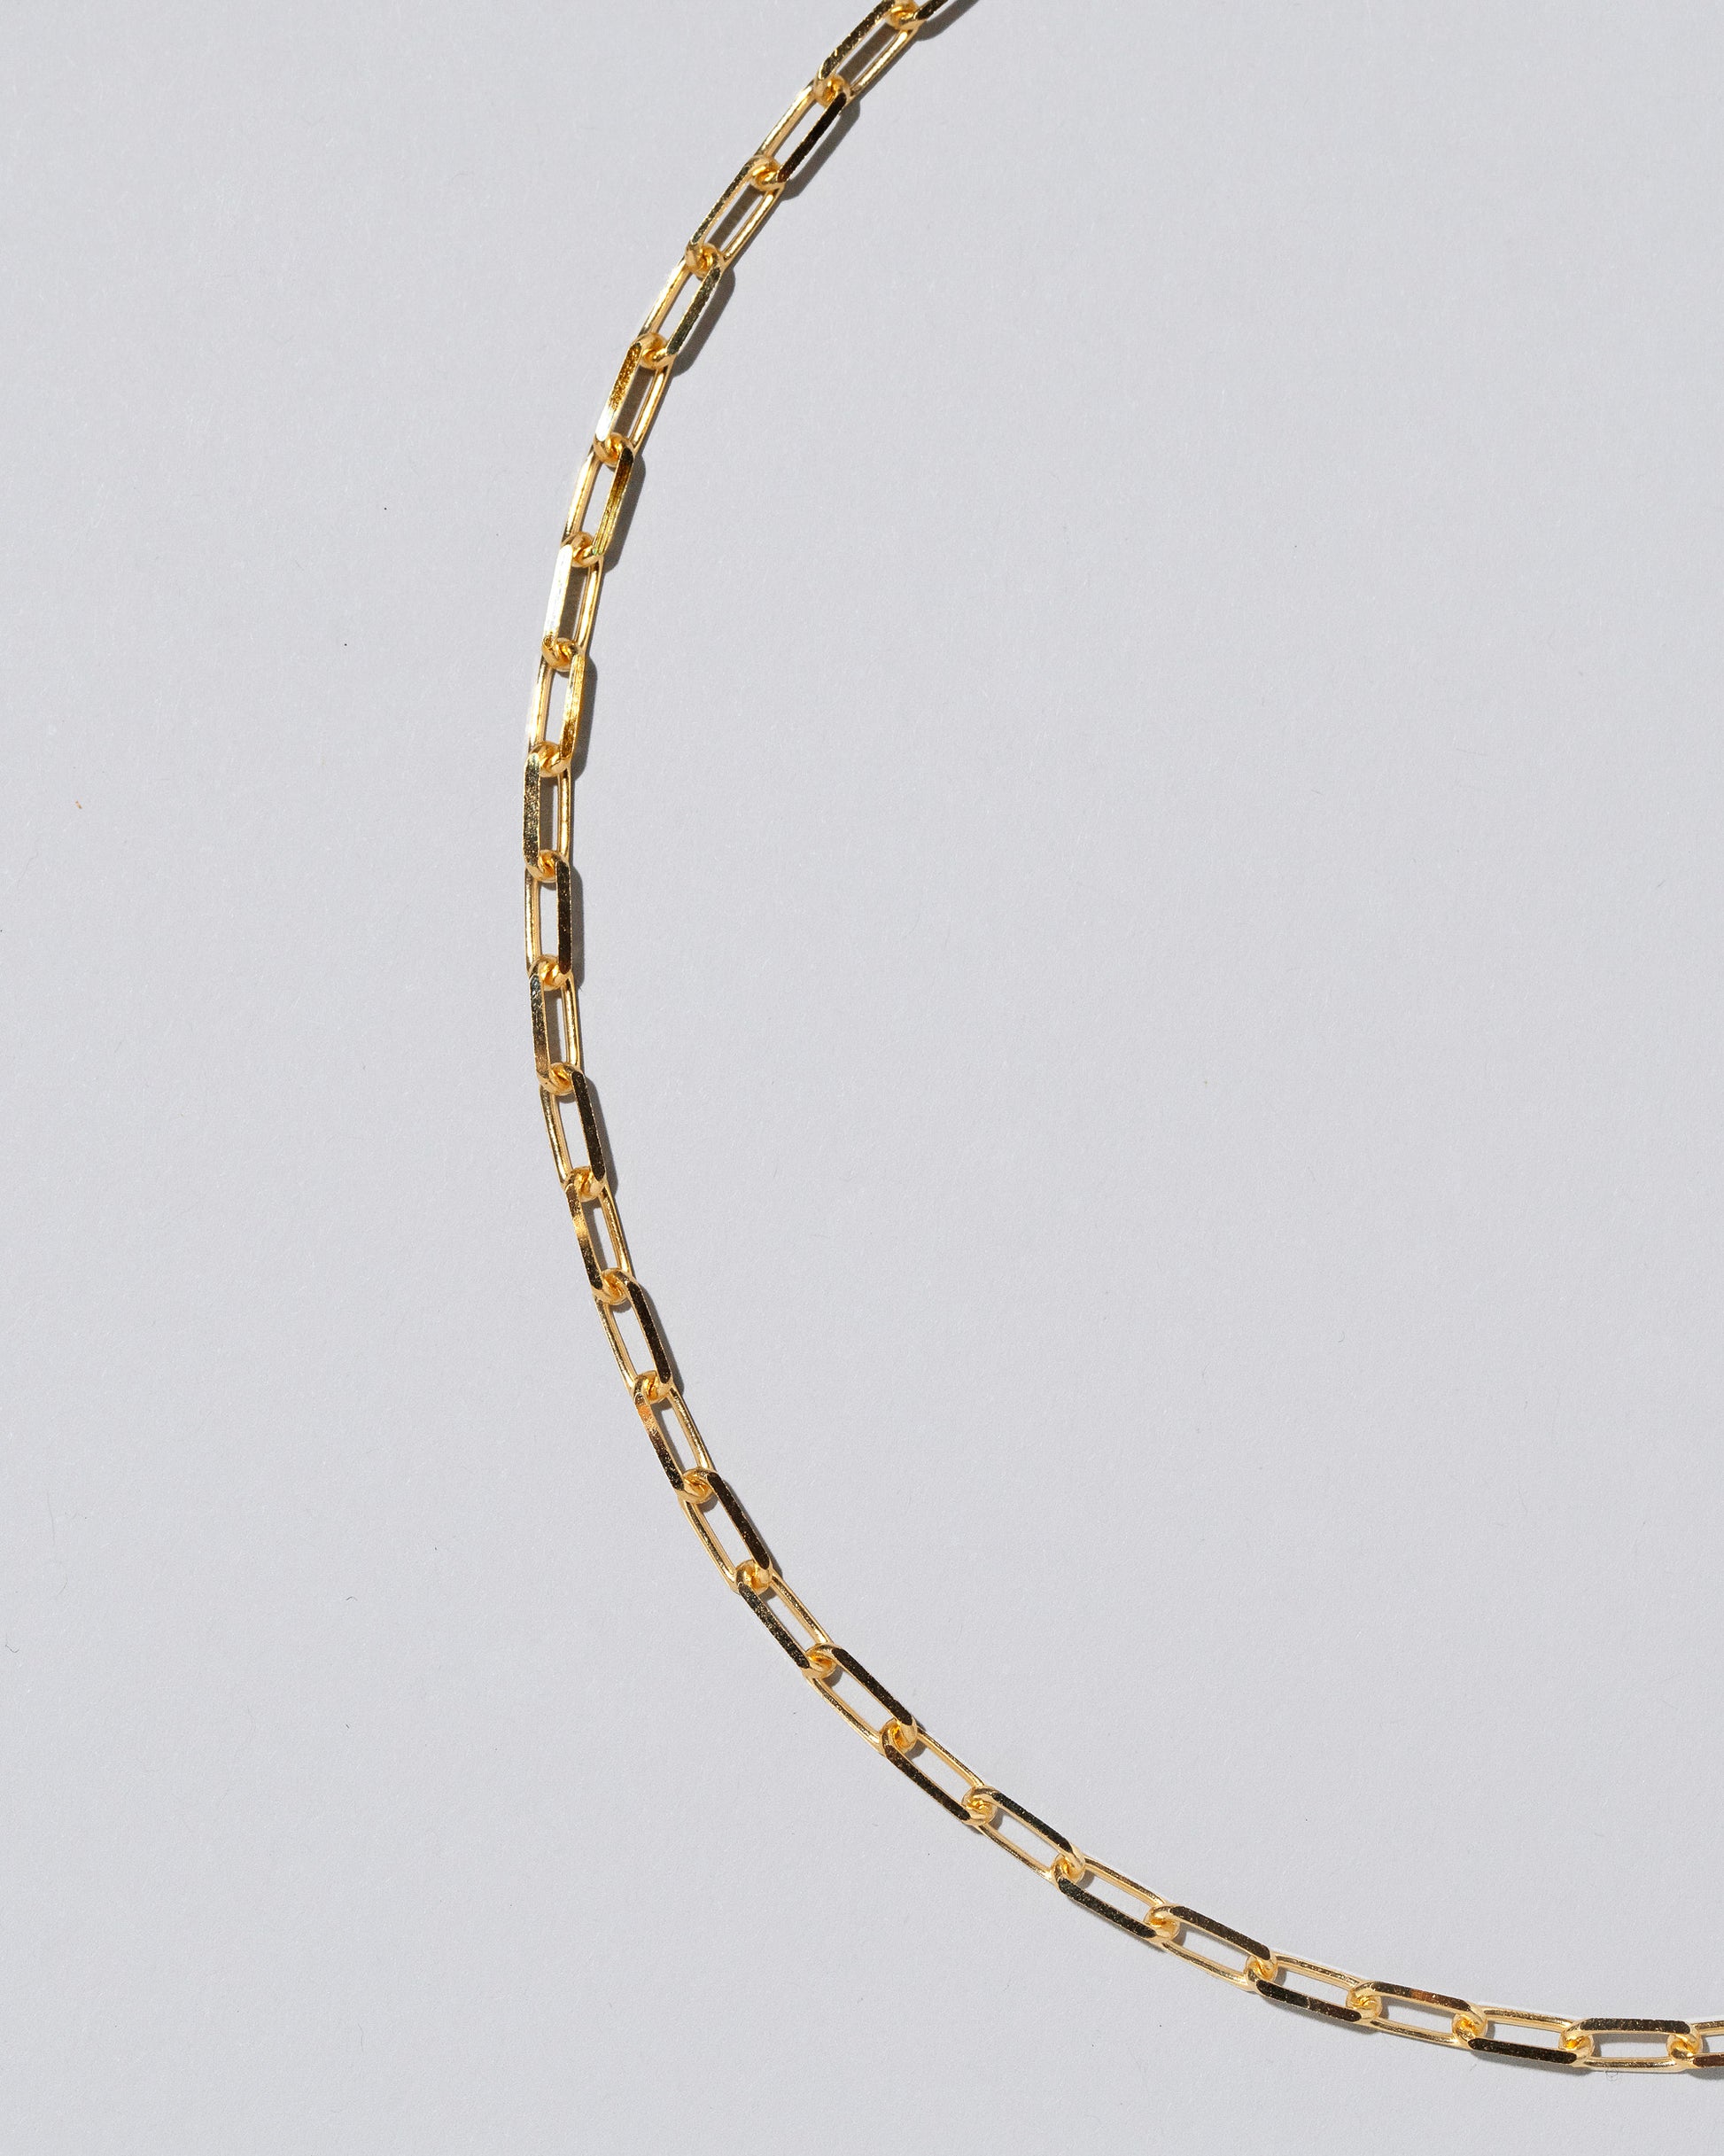 Closeup detail of the 3.5mm Lightweight Beveled Oval Chain Necklace on light color background.